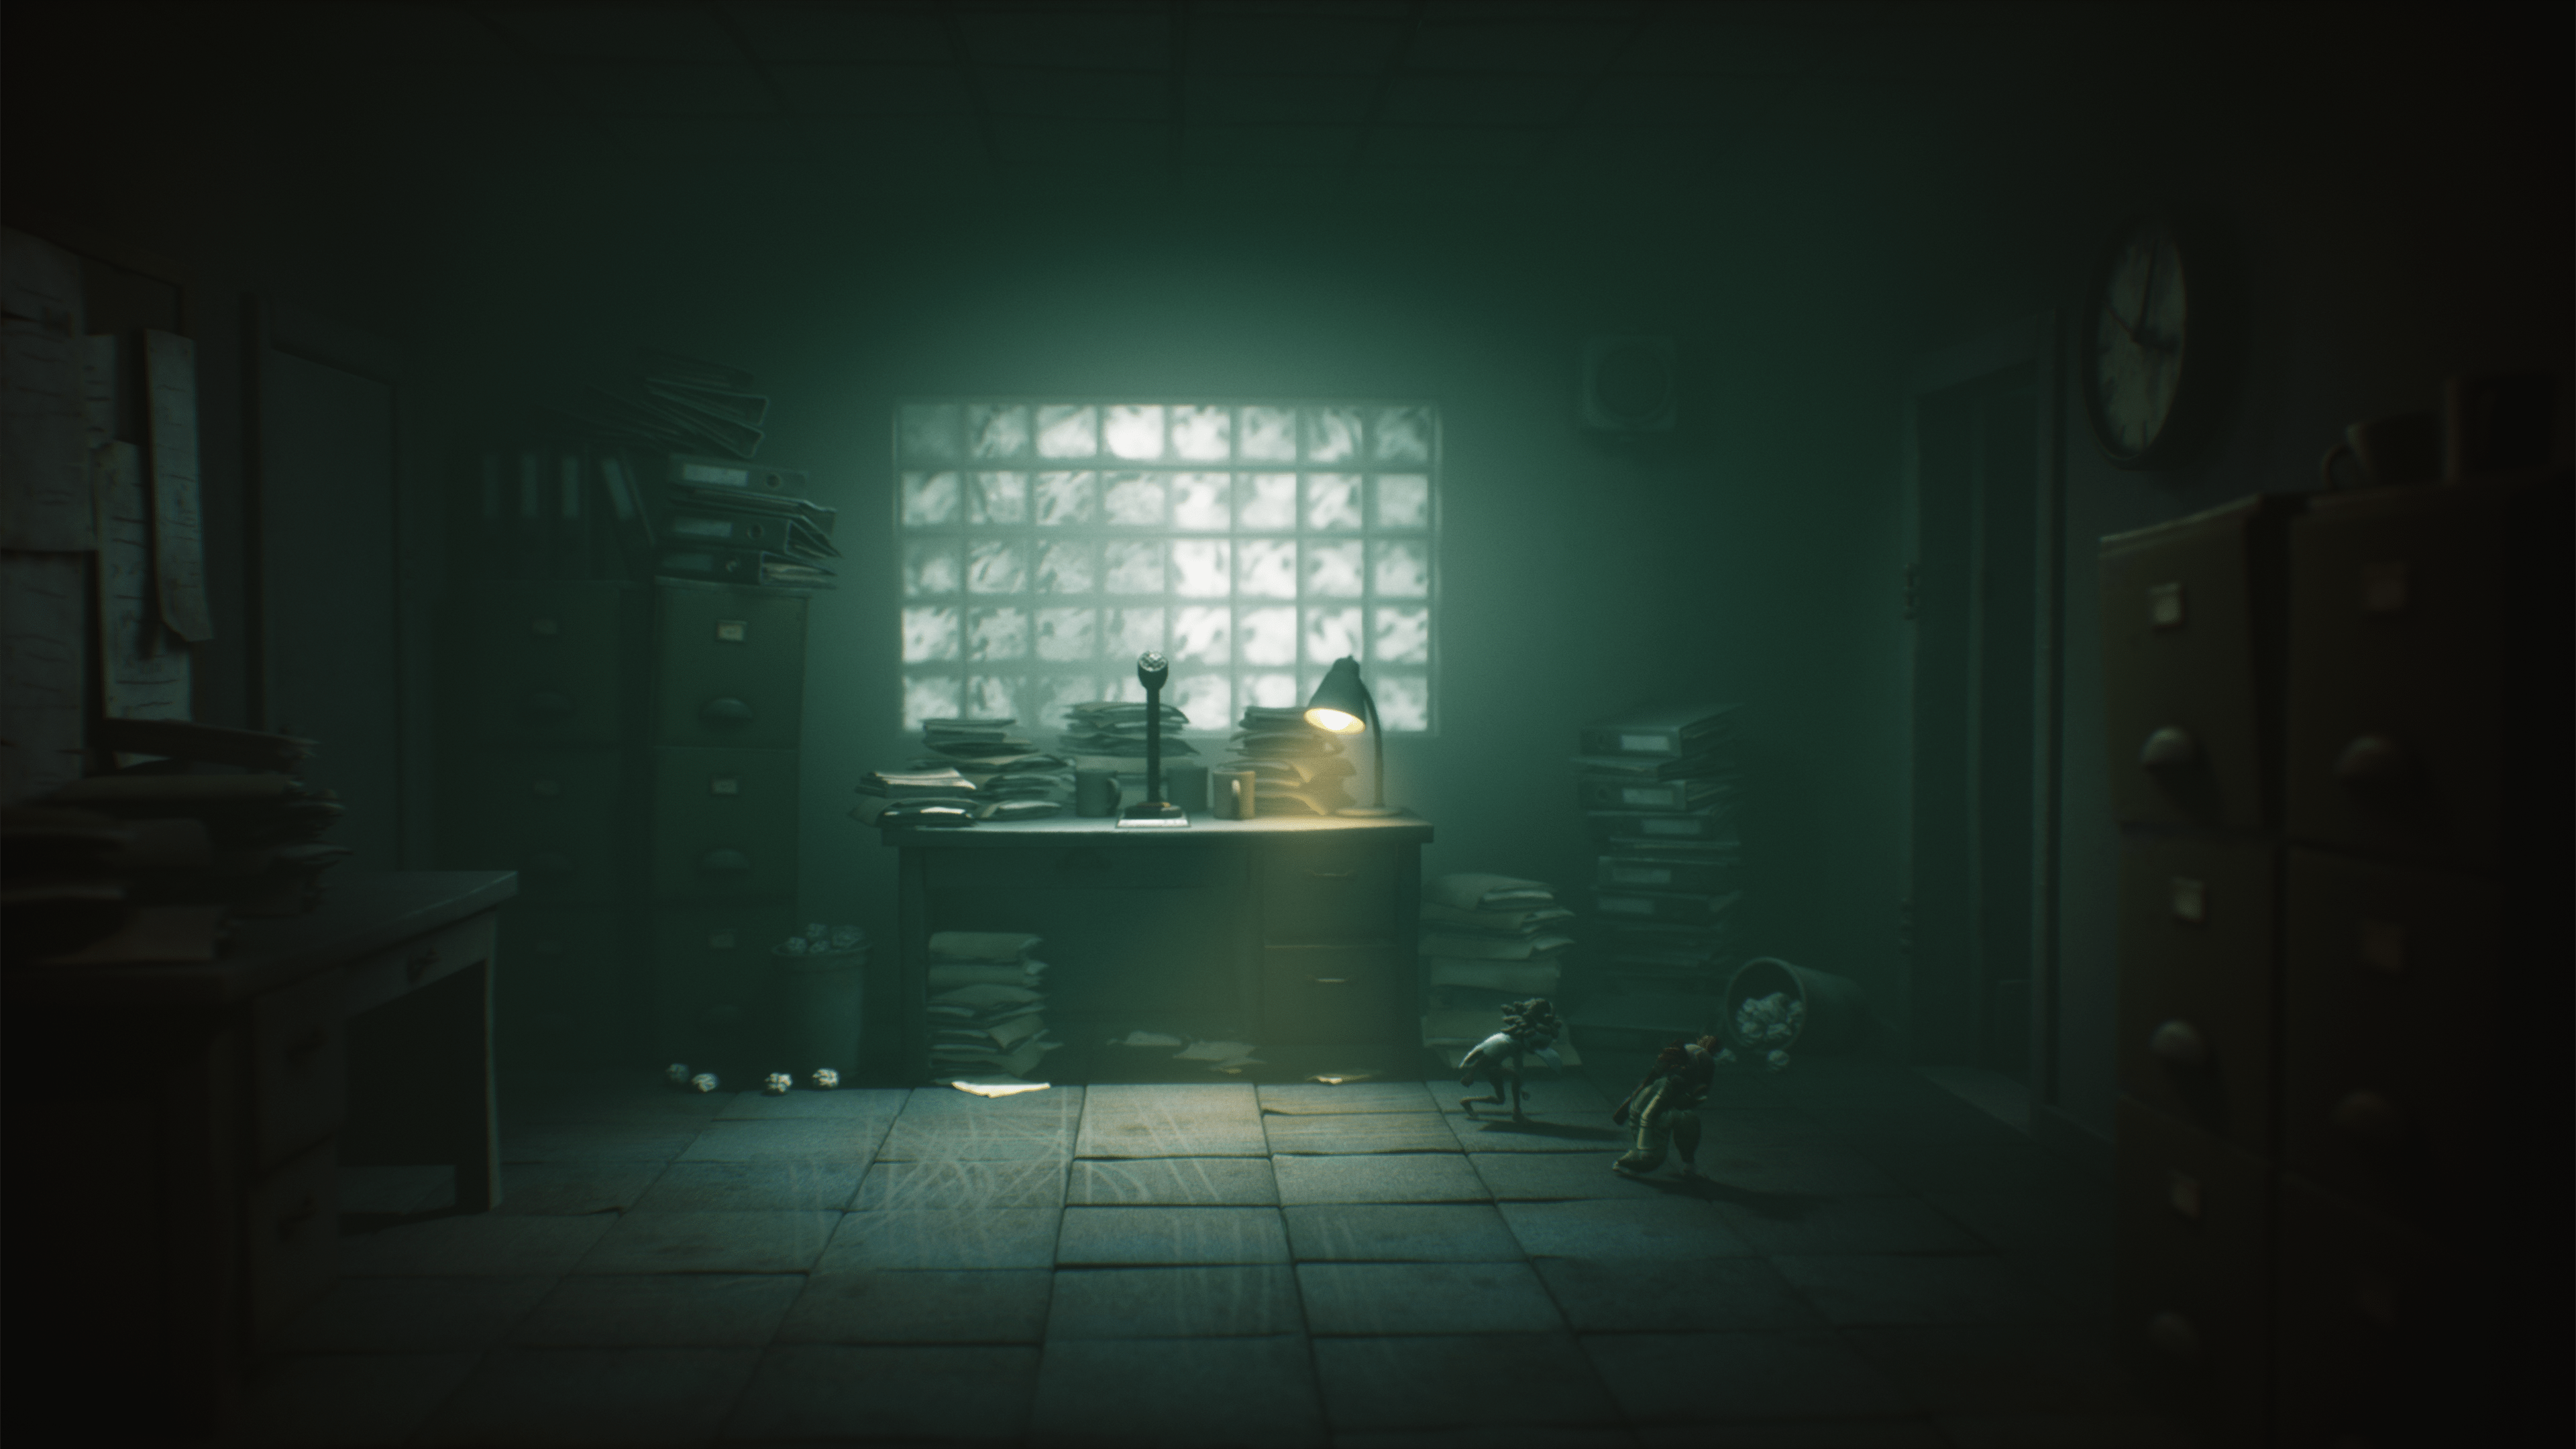 Little Nightmares third and final DLC arrives on Xbox One, PS4 and PC